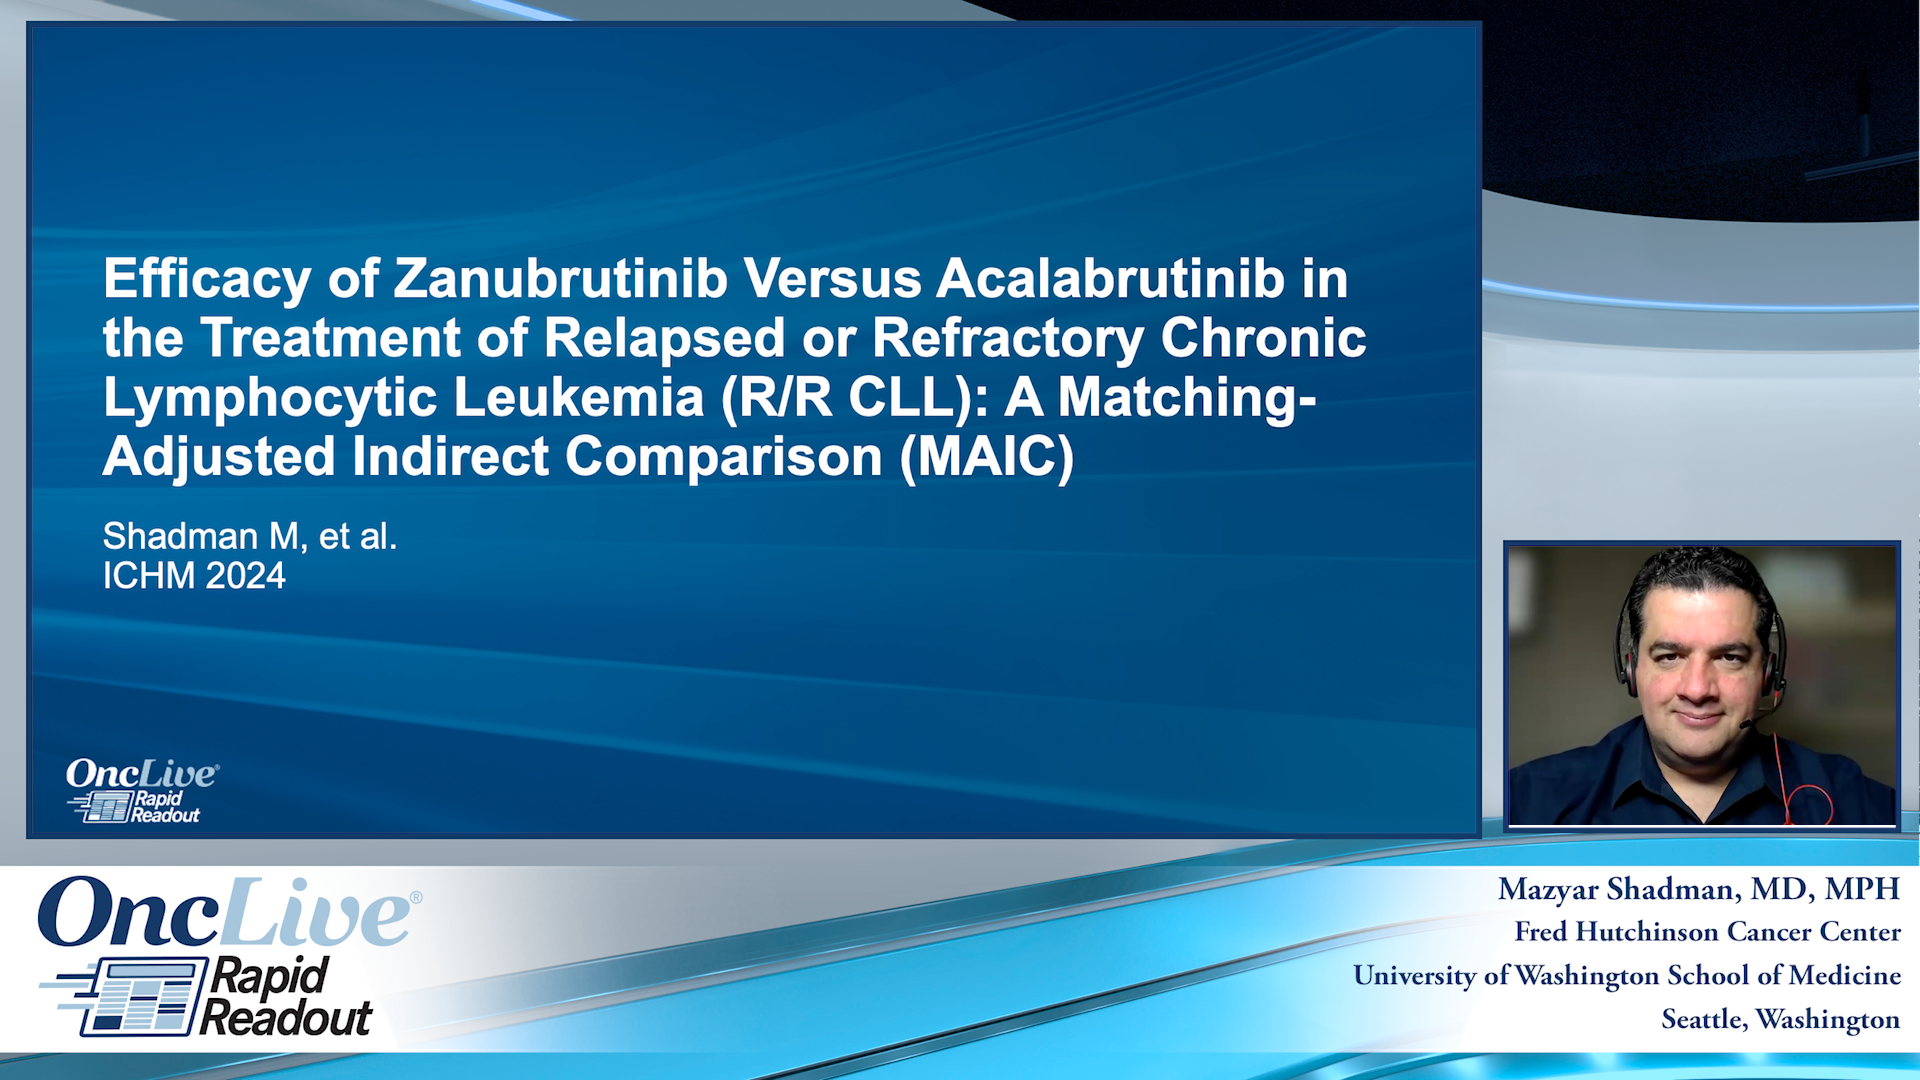 Efficacy of Zanubrutinib Versus Acalabrutinib in the Treatment of Relapsed or Refractory Chronic Lymphocytic Leukemia (R/R CLL): A Matching-Adjusted Indirect Comparison (MAIC)